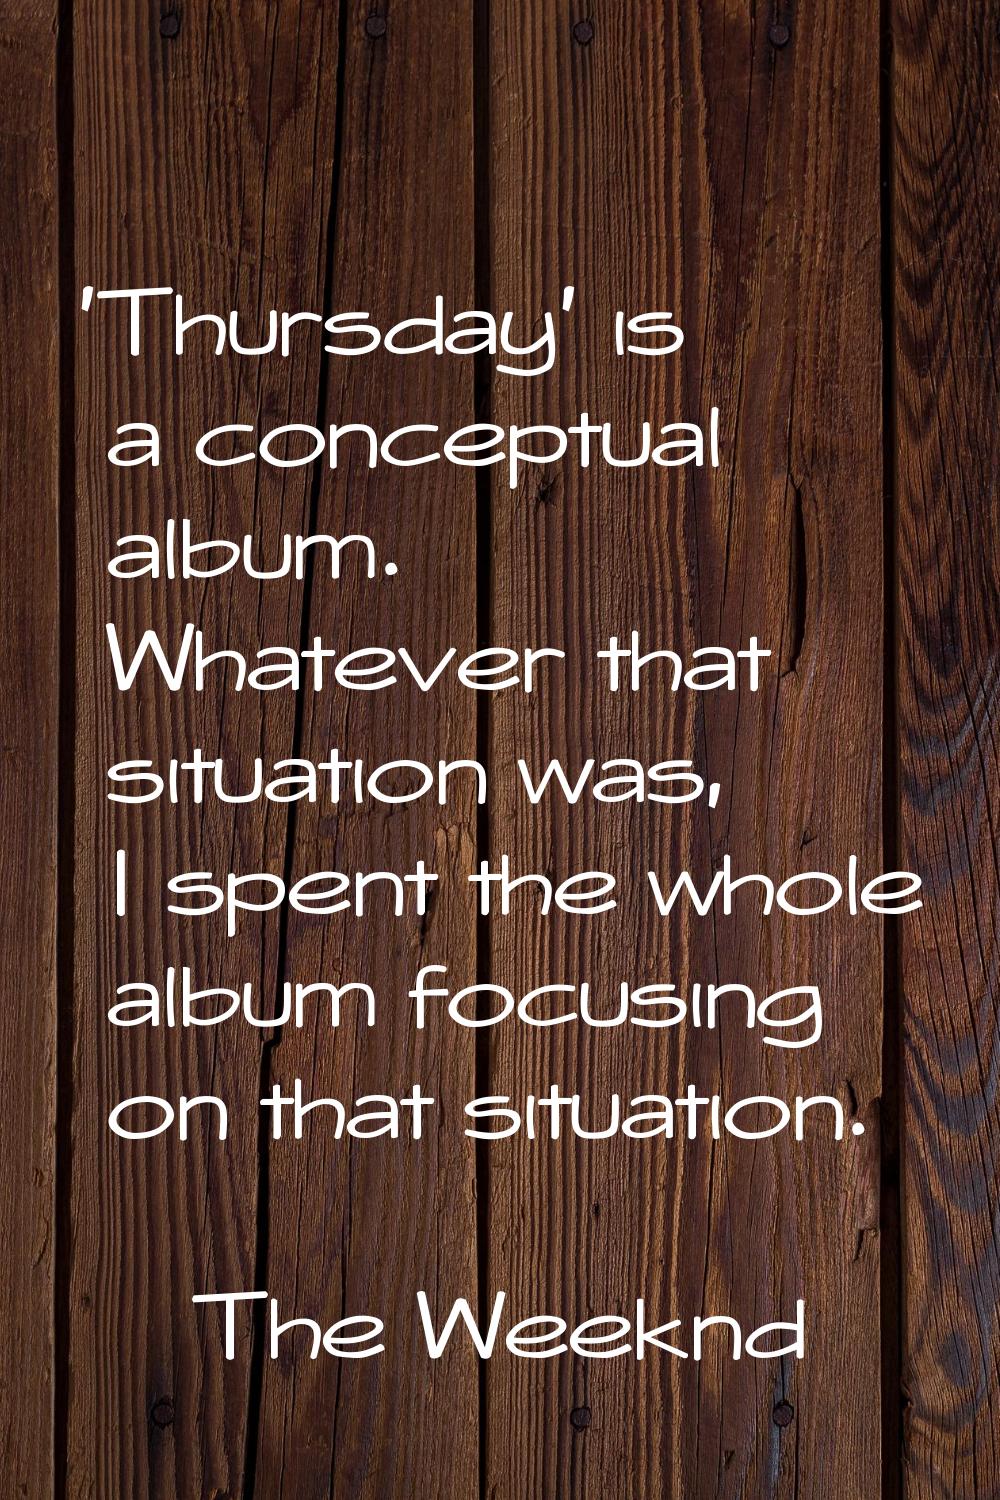 'Thursday' is a conceptual album. Whatever that situation was, I spent the whole album focusing on 